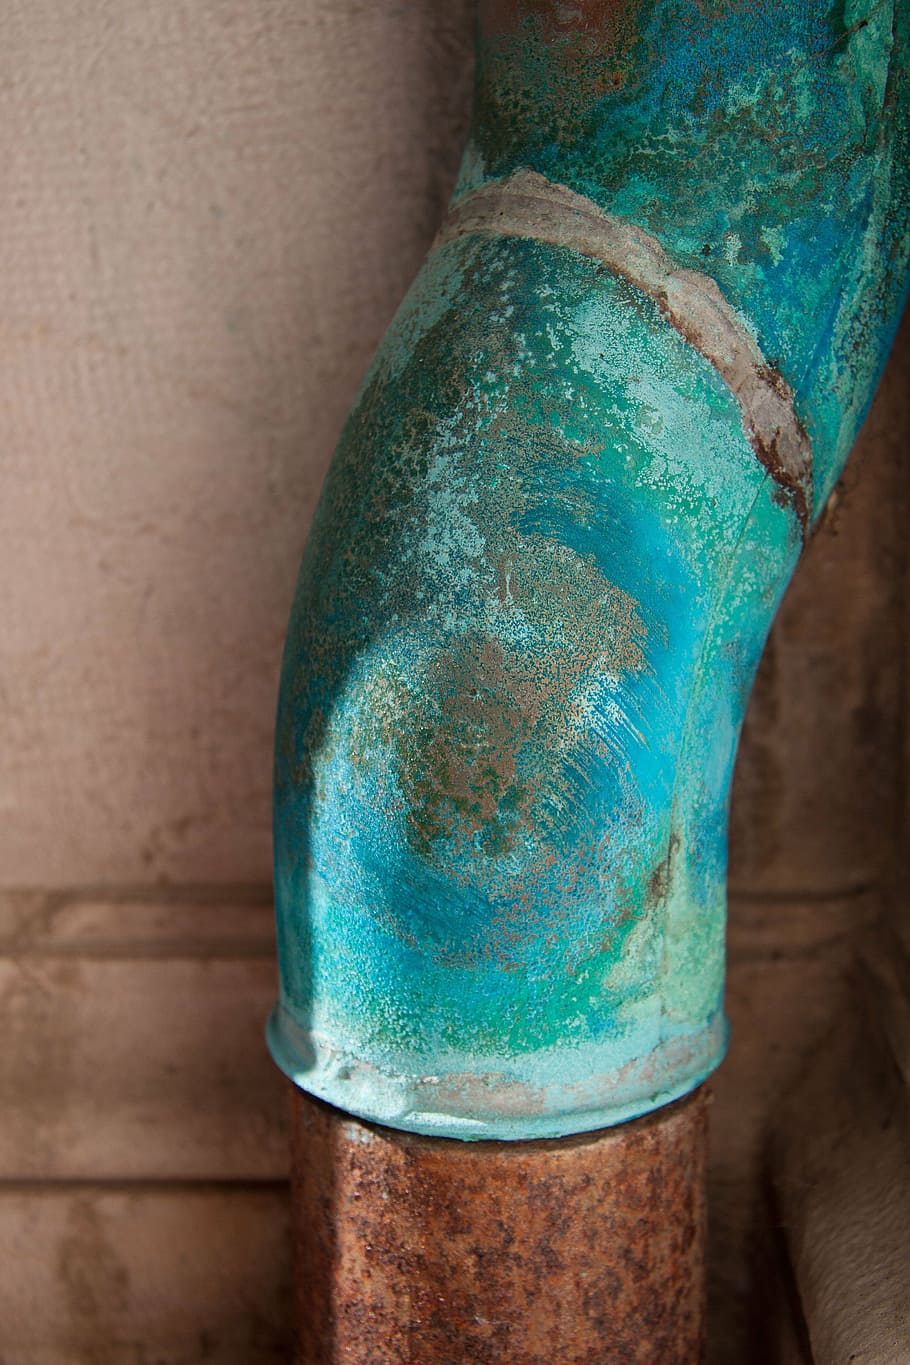 gutter, old, weathered, paint, turquoise, green, close-up, blue, human body part, turquoise colored